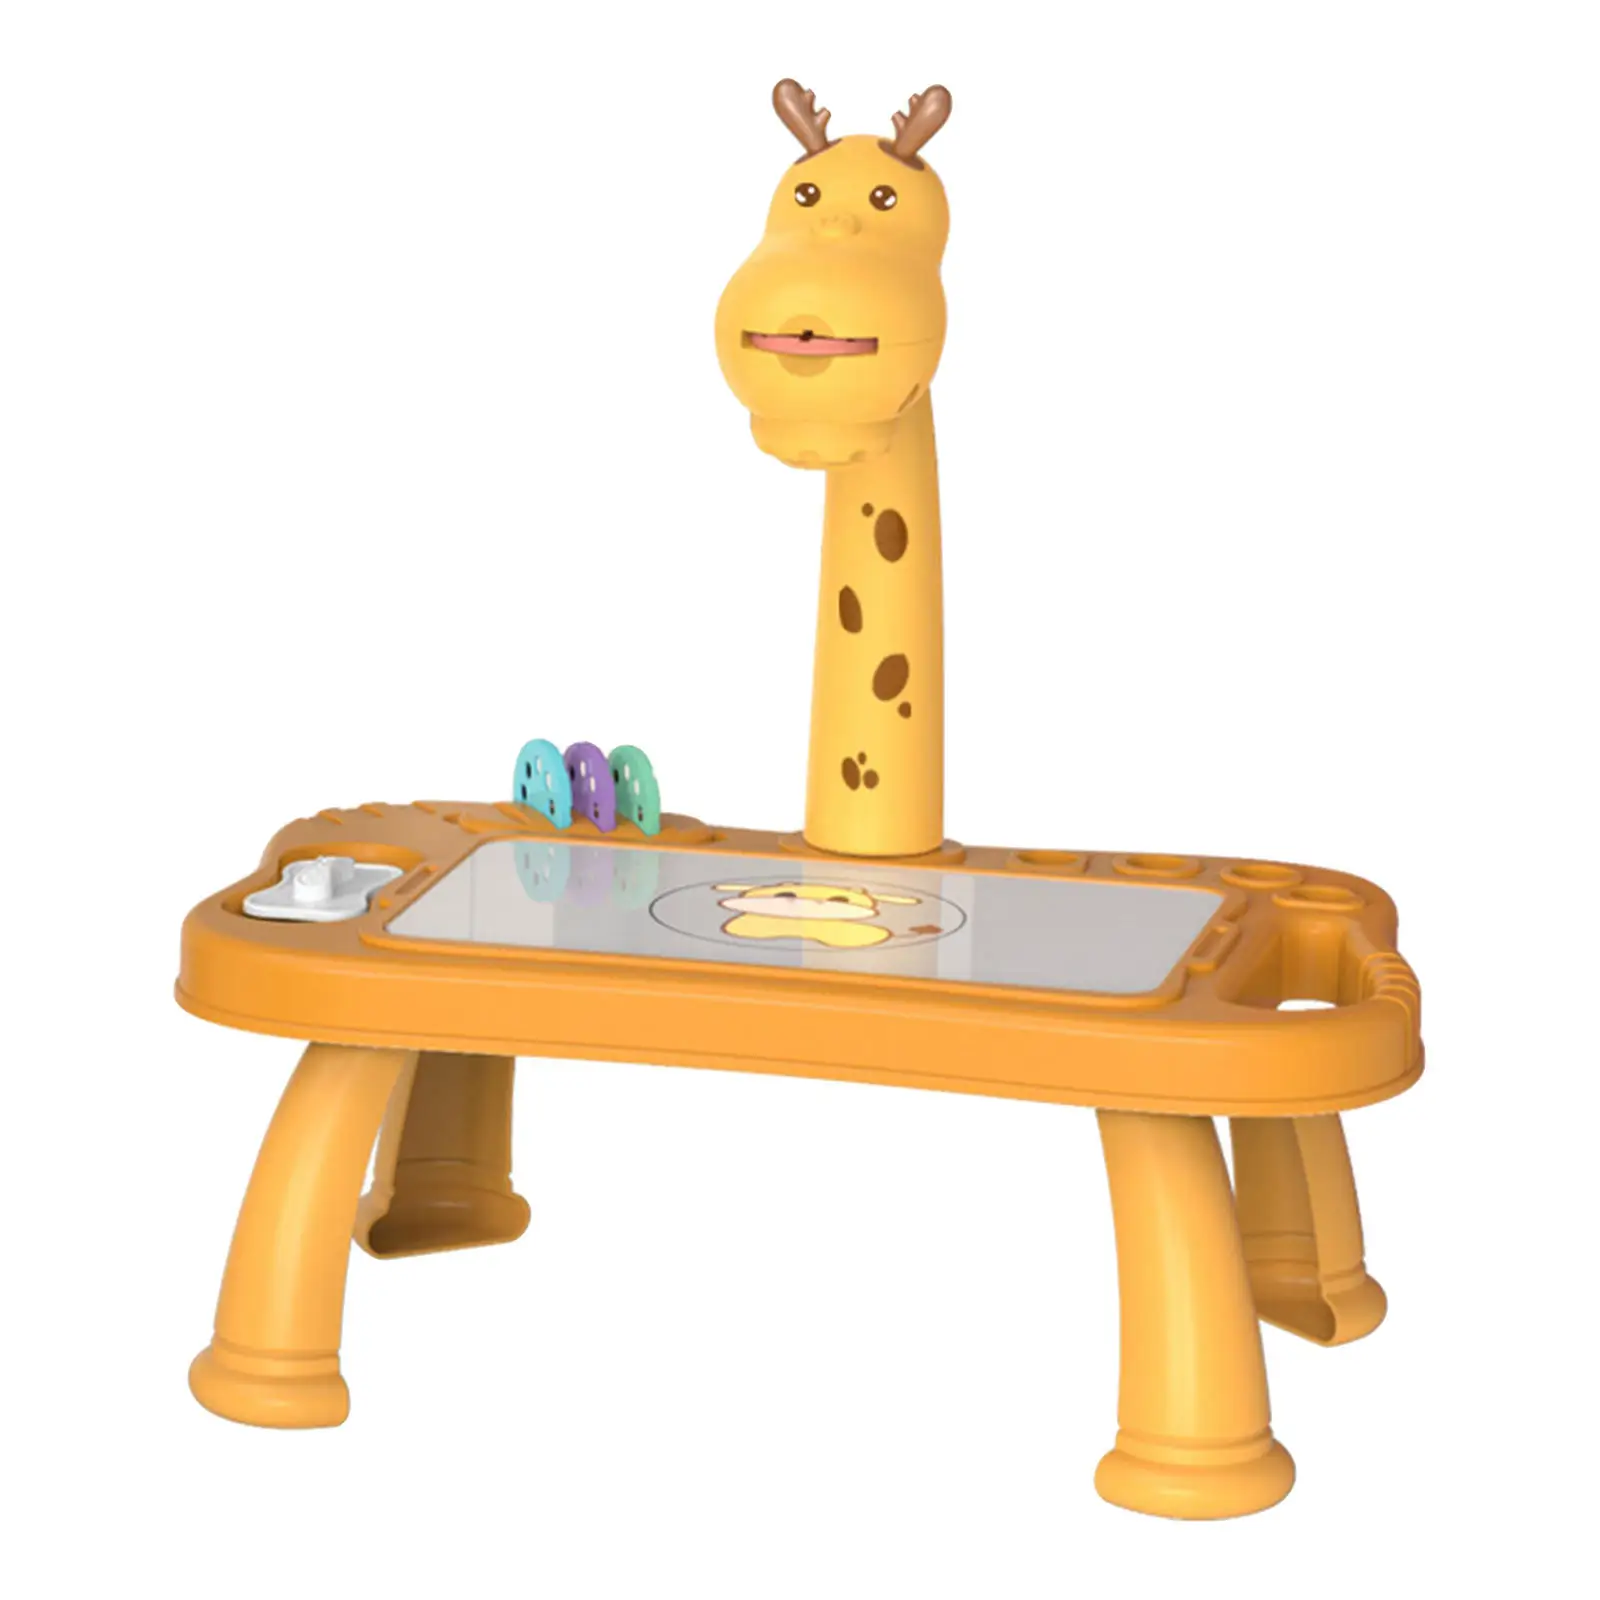 Kids Drawing Board Child Funny Smart Drawing Projector Desk Toy Painting Machine Playset Boy Girl Table Educational Toy